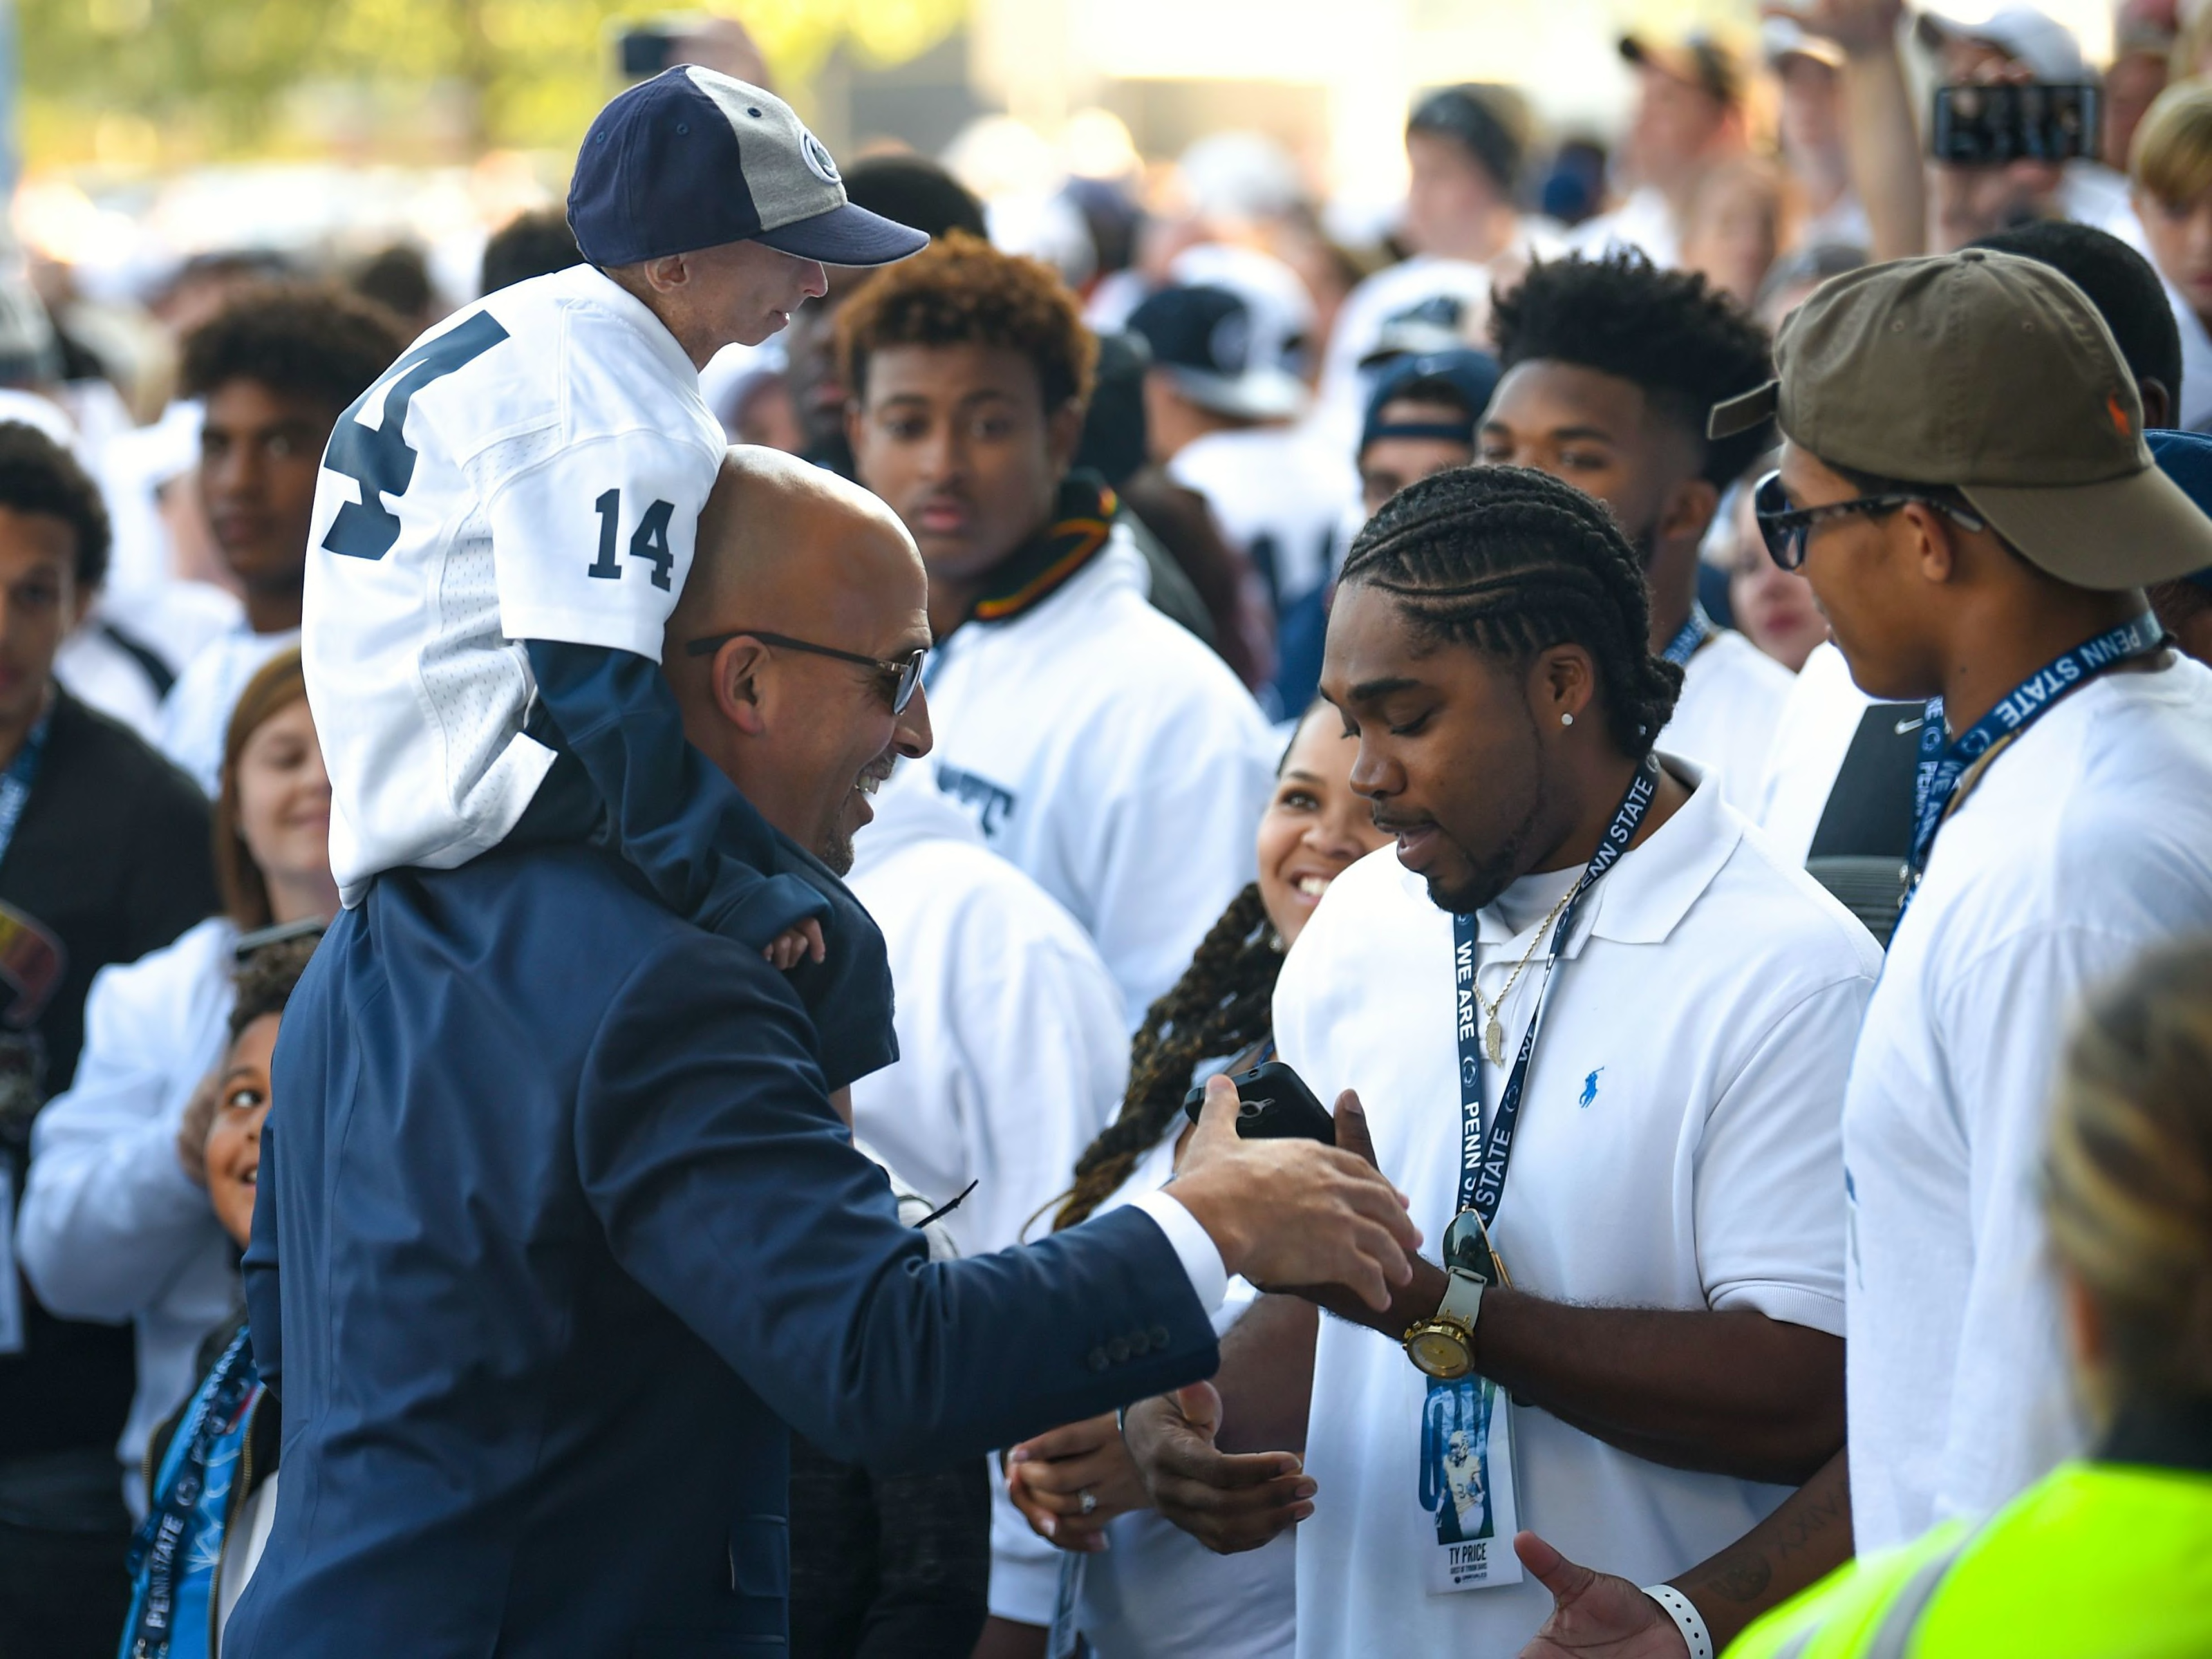 Penn State Football Recruiting Pivotal spring for 2022, Lonnie White